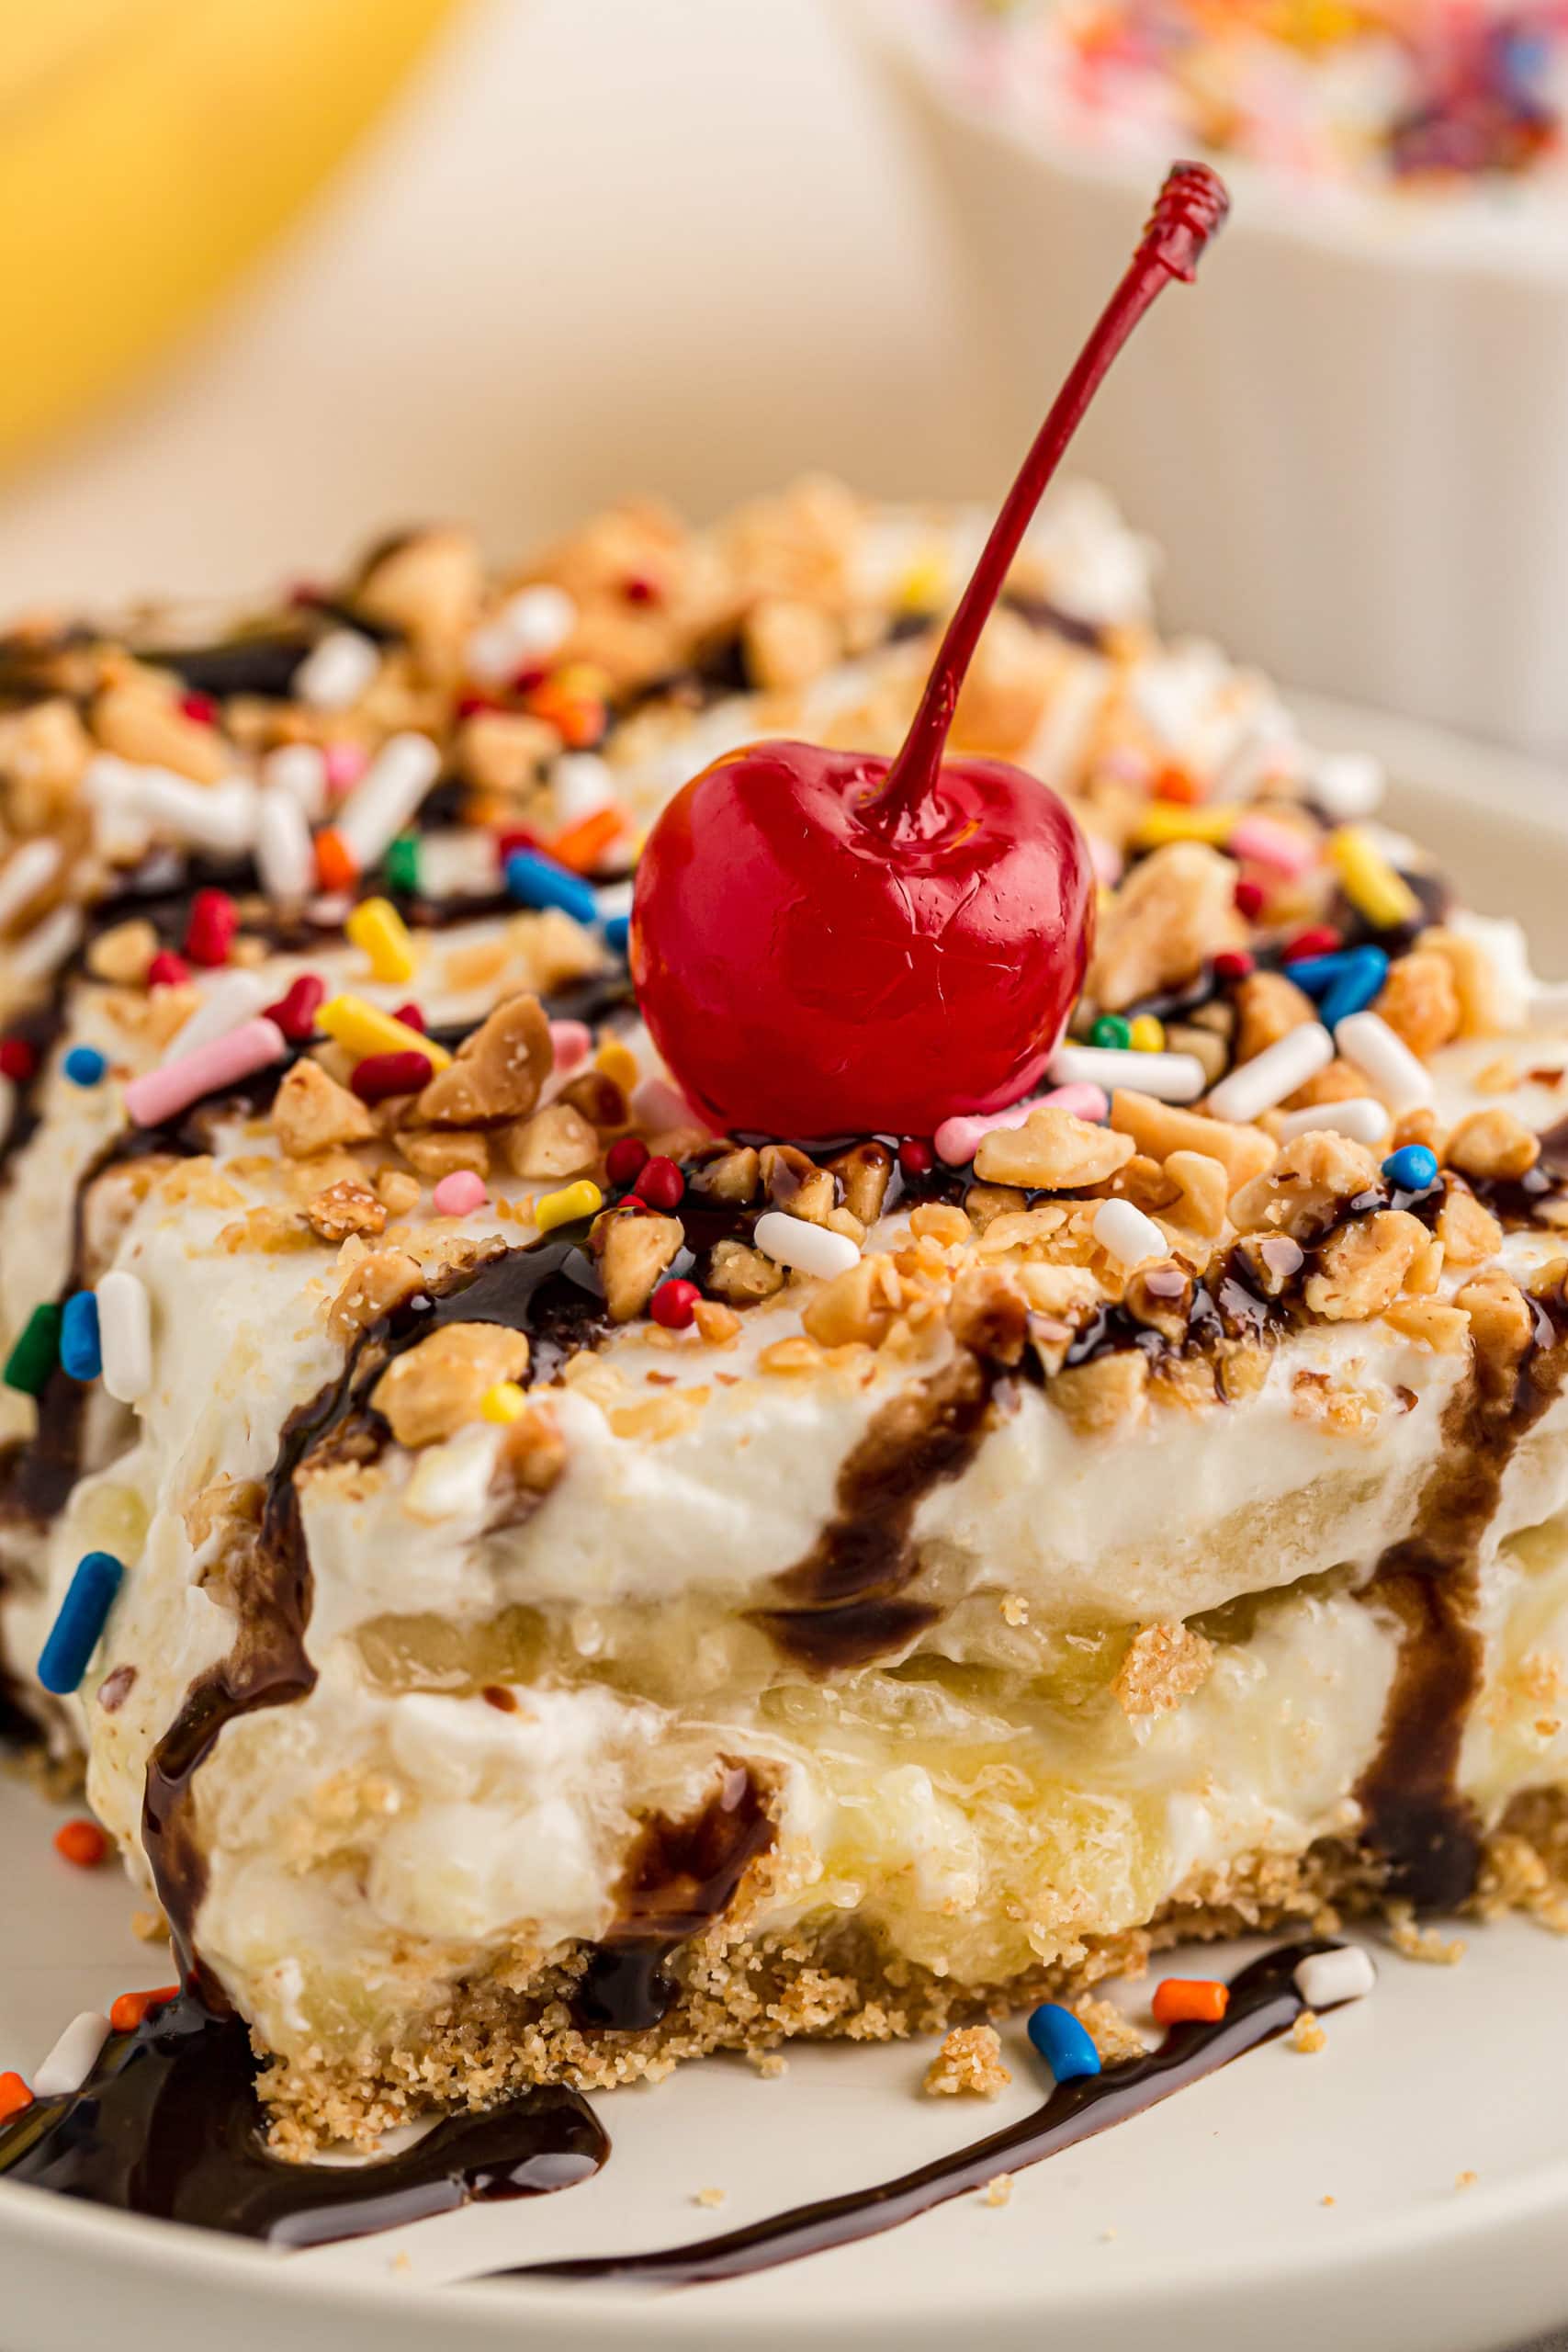 Closeup of banana split cake topped with cherry